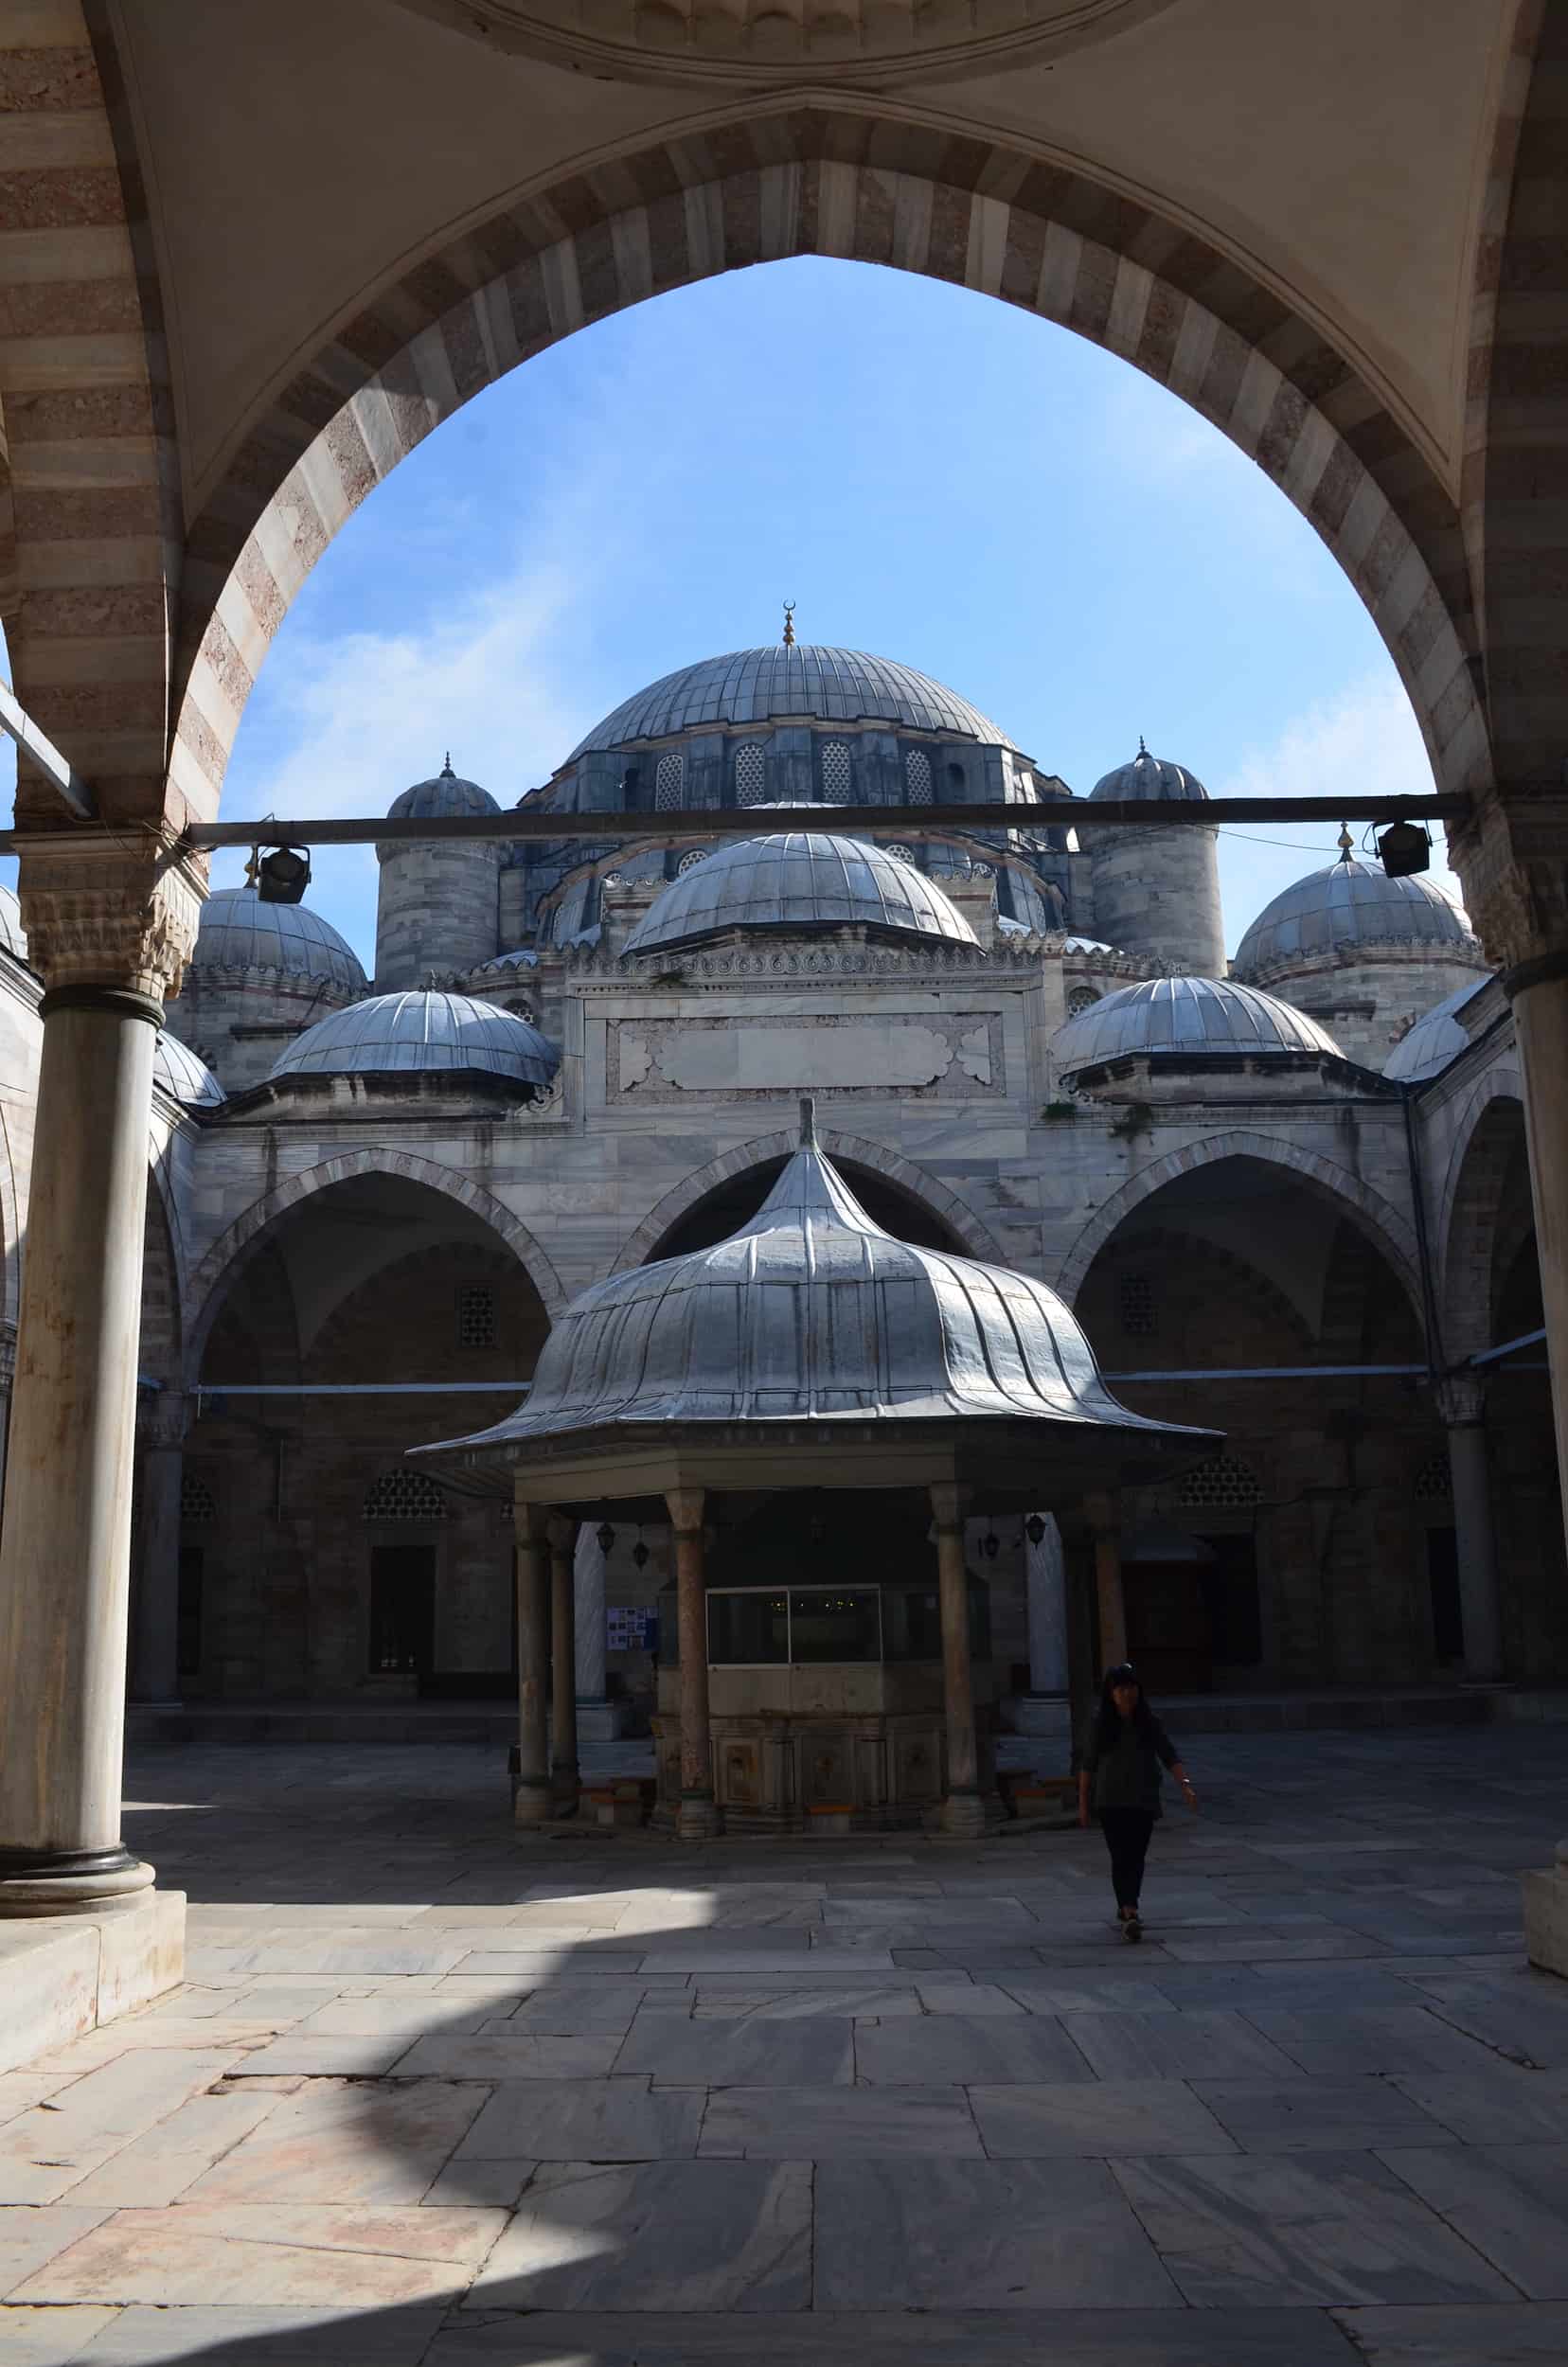 Courtyard at the Şehzade Mosque in Istanbul, Turkey